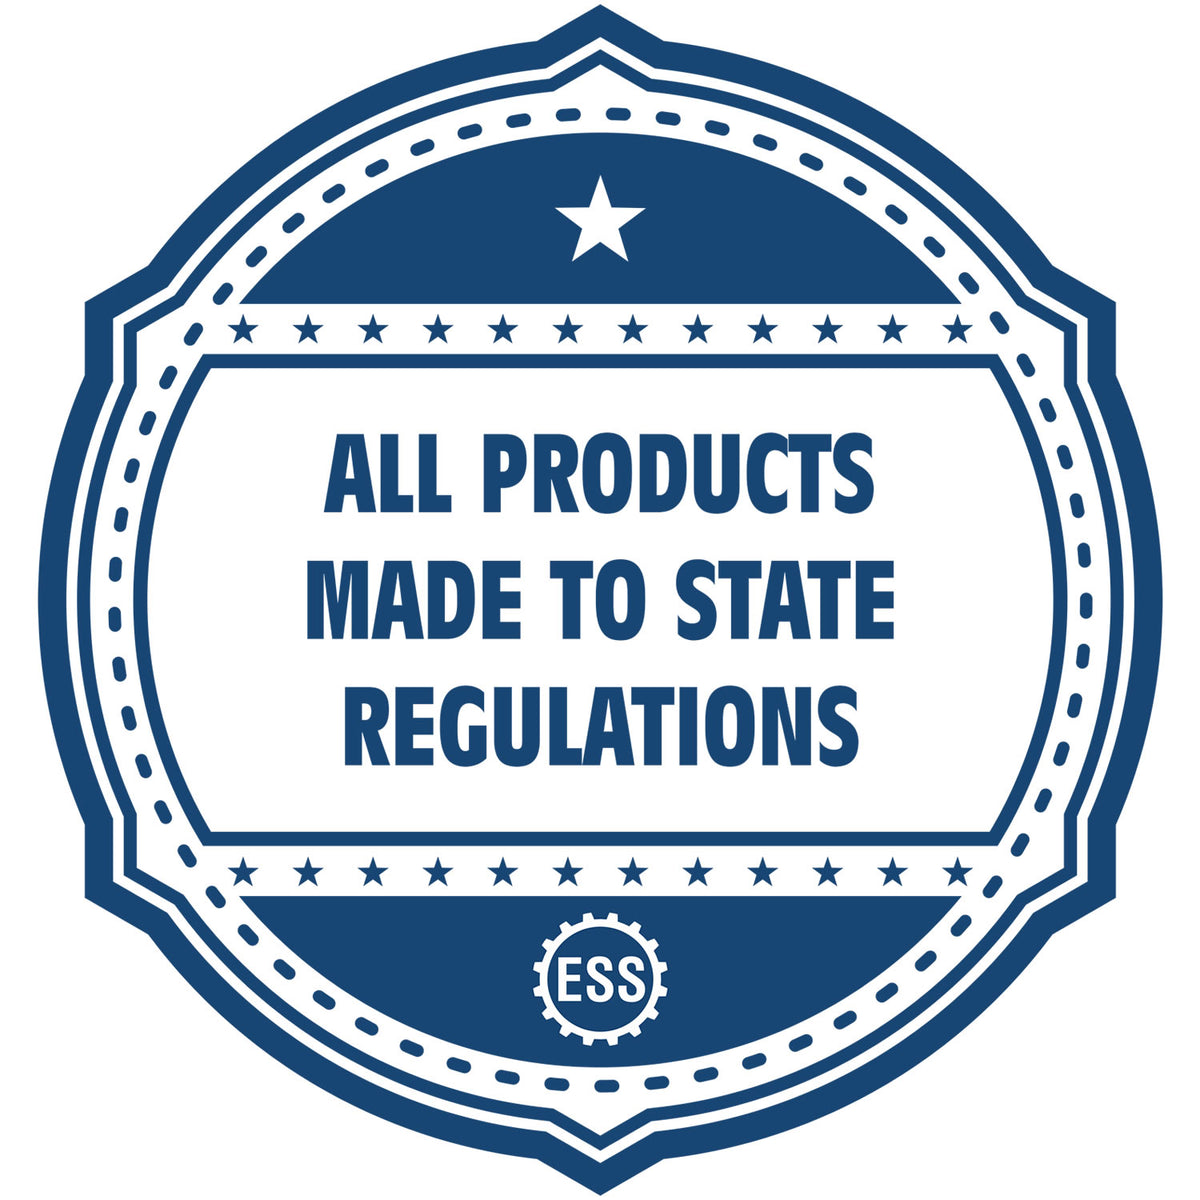 An icon or badge element for the State of Arizona Architectural Seal Embosser showing that this product is made in compliance with state regulations.